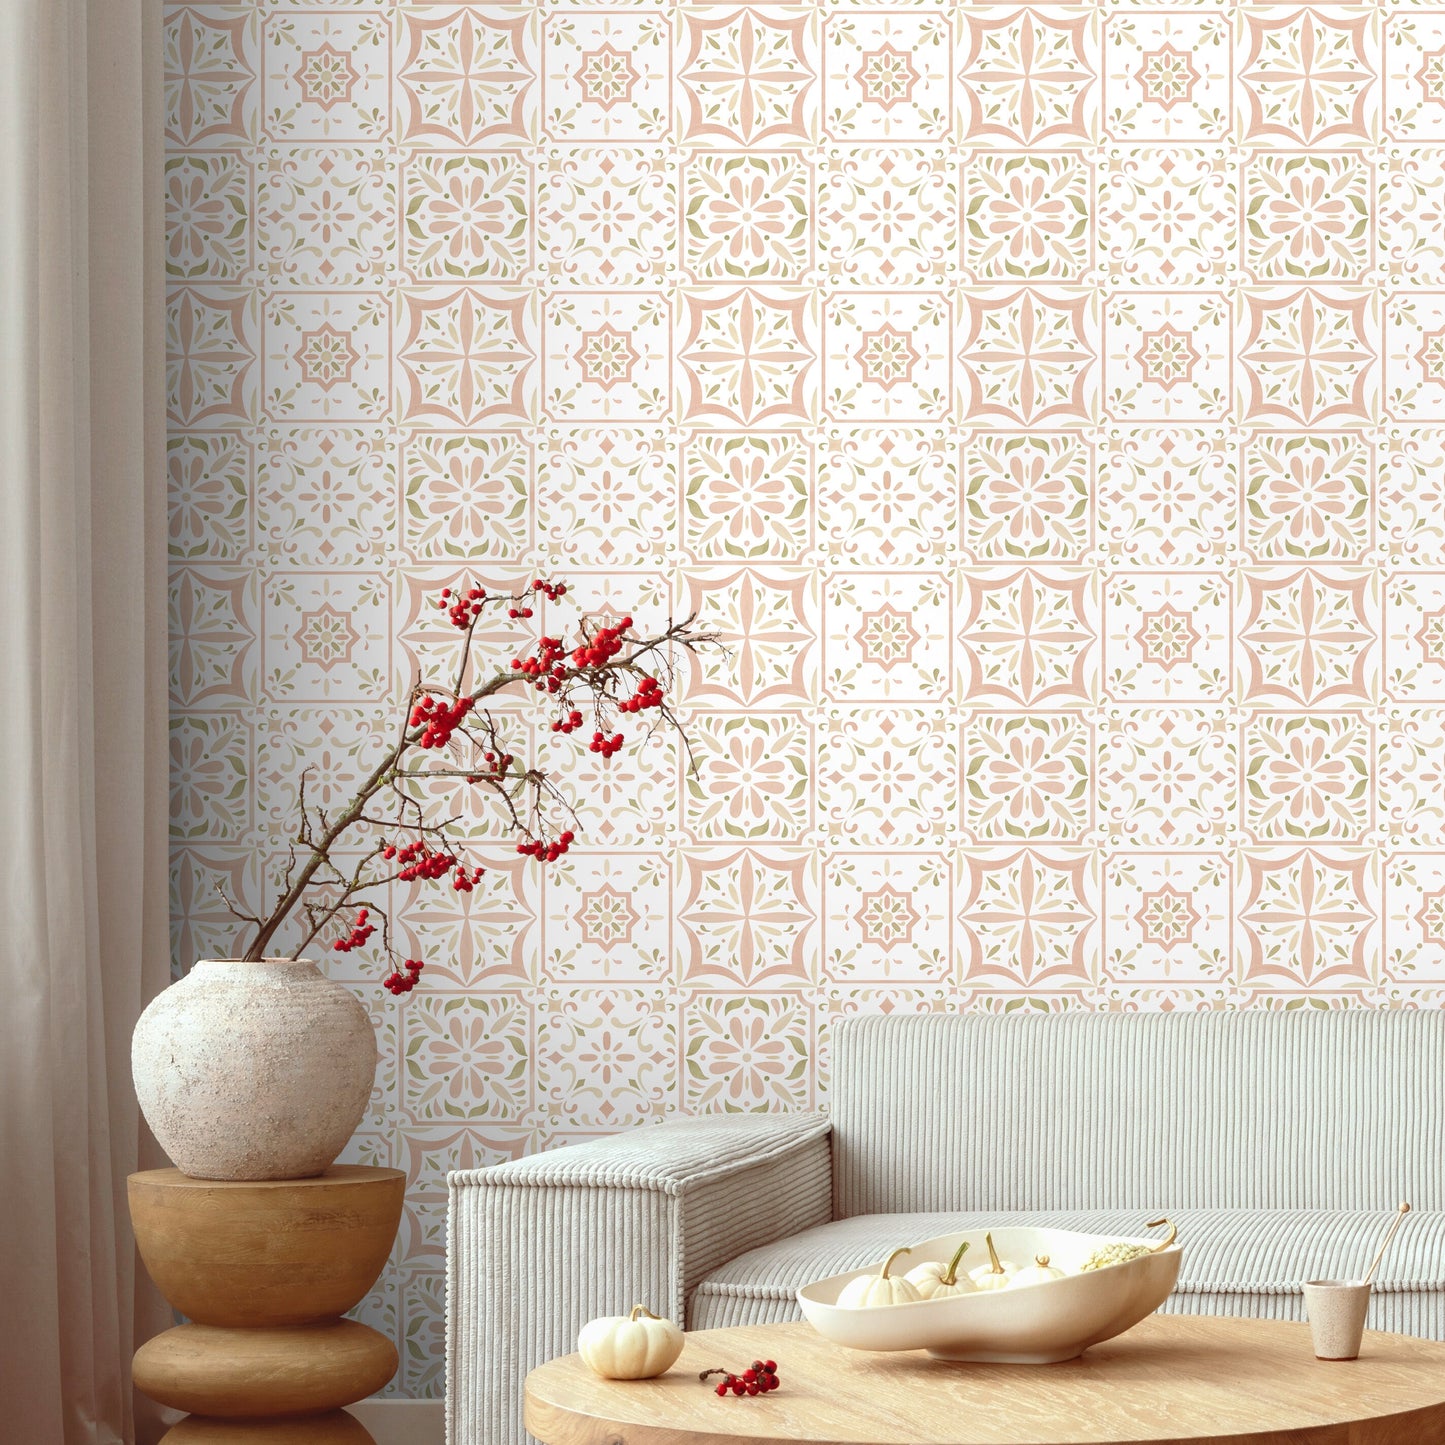 Removable Wallpaper Wallpaper Temporary Wallpaper Flowers Wallpaper Peel and Stick Wallpaper Wall Paper - C256